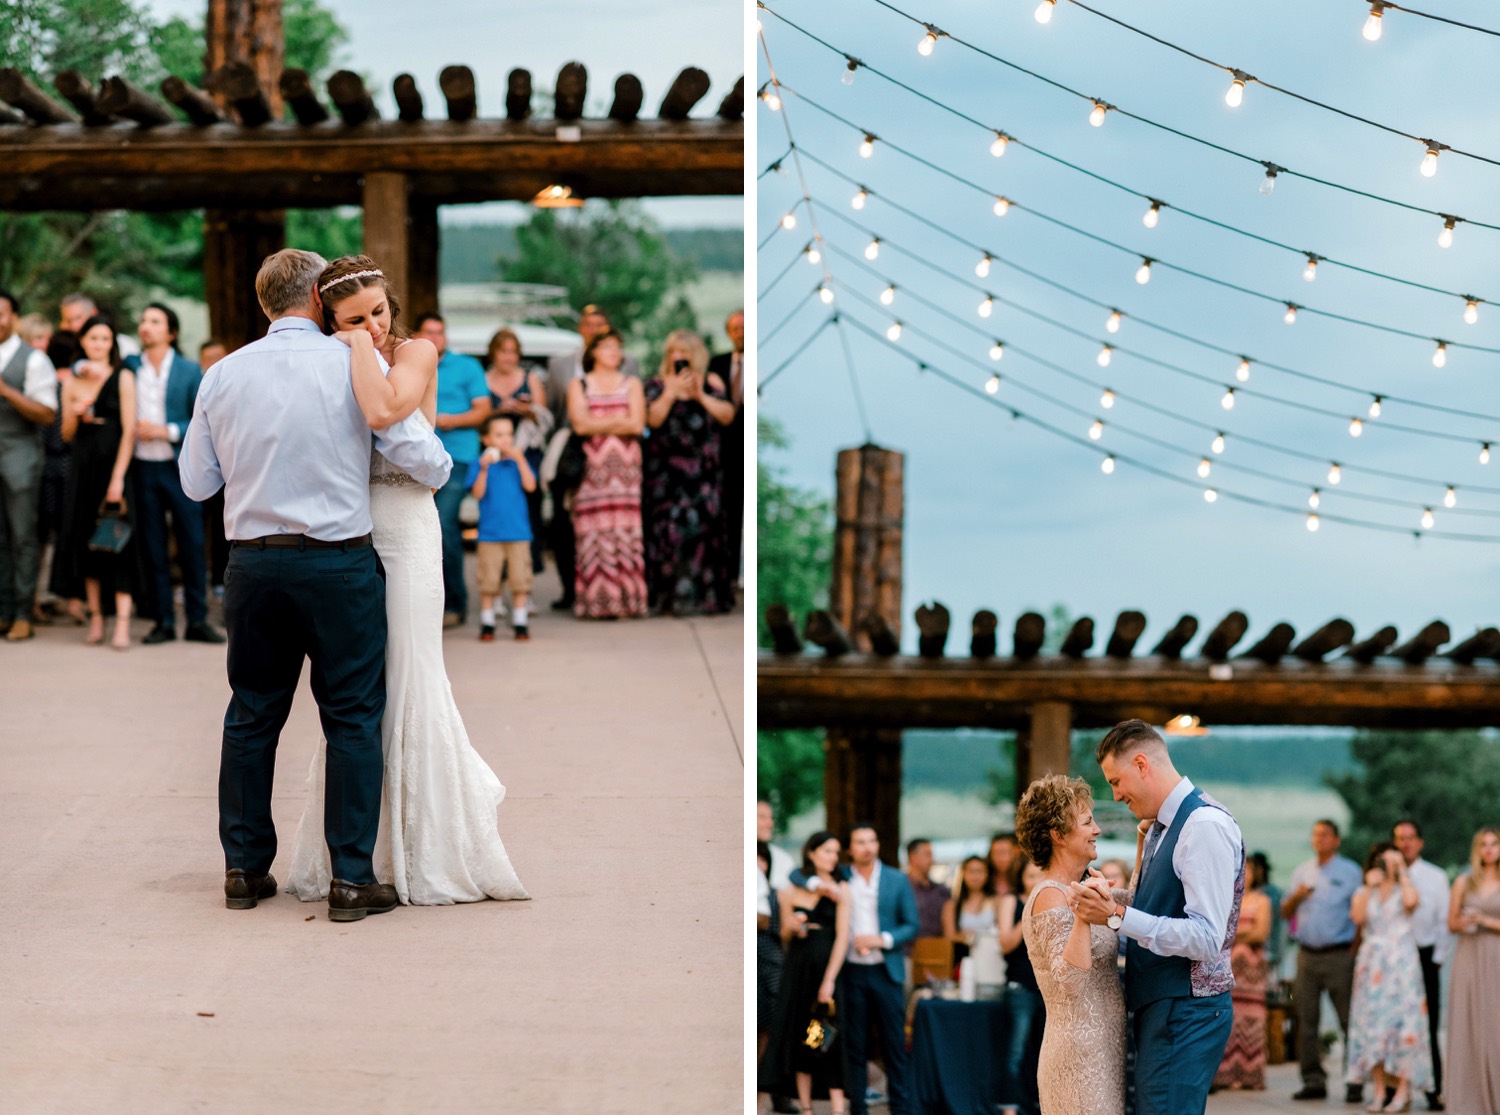 Kristen and Charlton chose to have an outdoor dance floor at Spruce Mountain Ranch in Larkspur for their summer Colorado wedding.